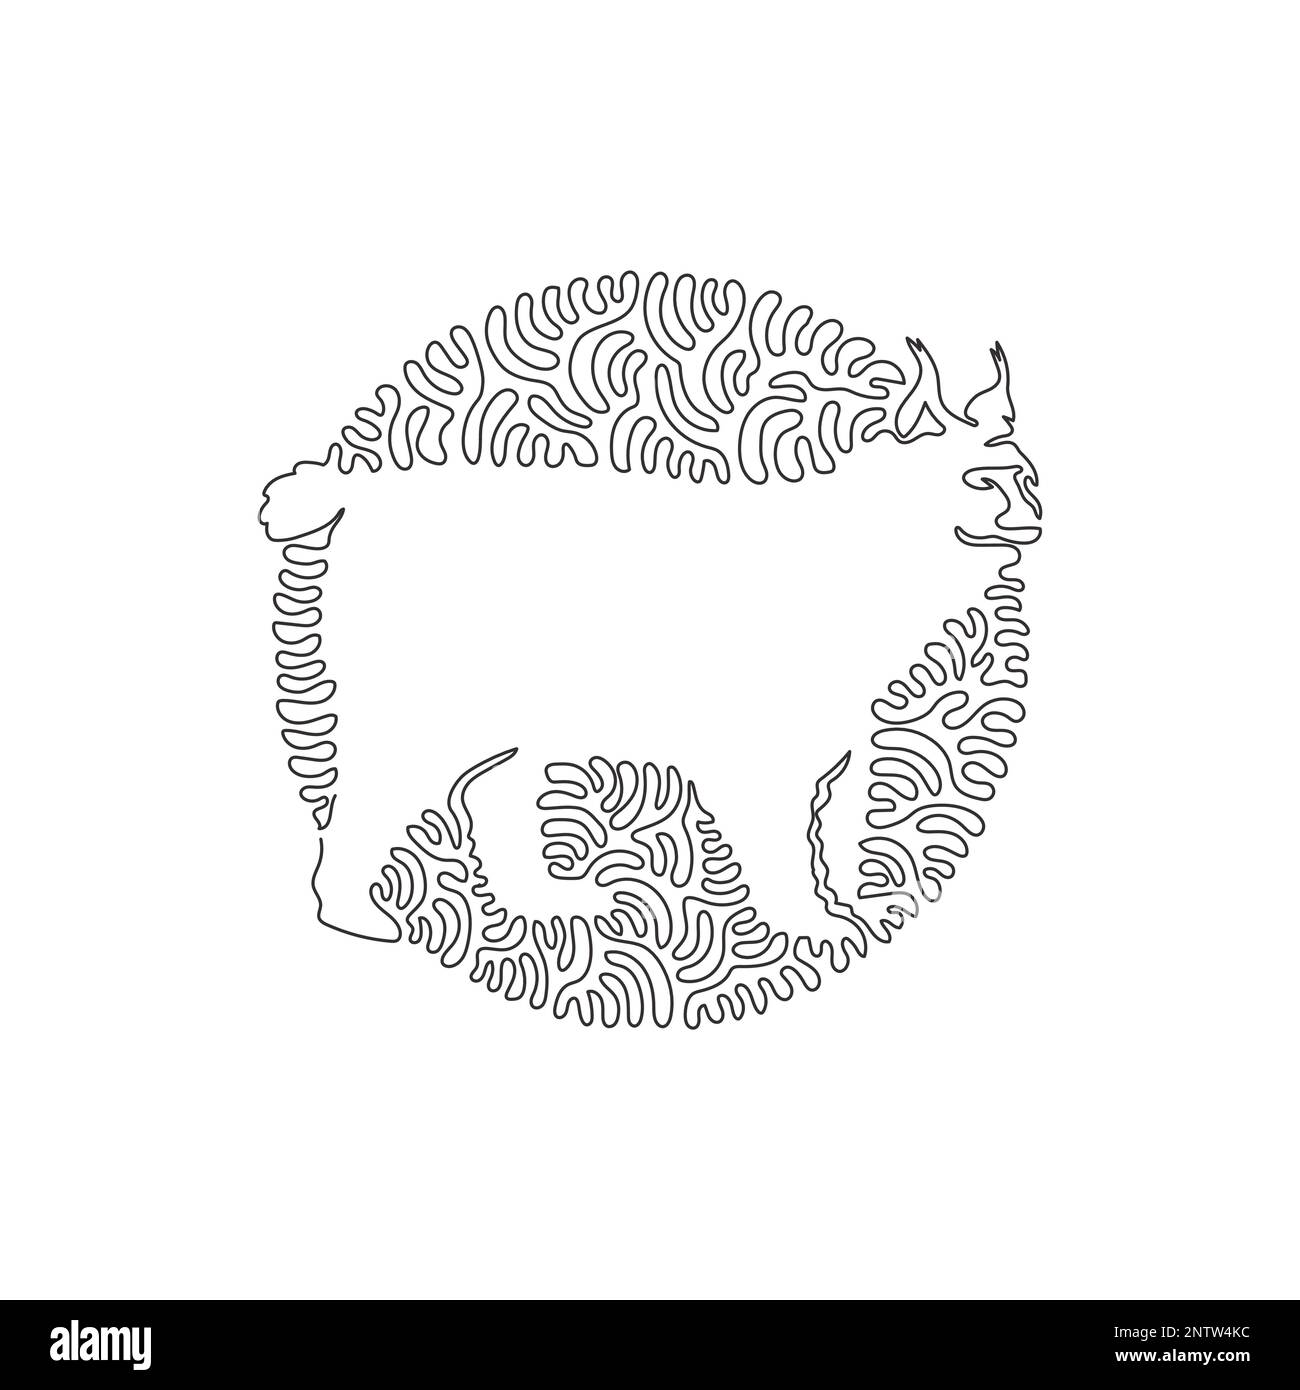 Continuous one curve line drawing of lynx skilled hunters abstract art in circle. Single line editable vector illustration of lynx stalking prey Stock Vector